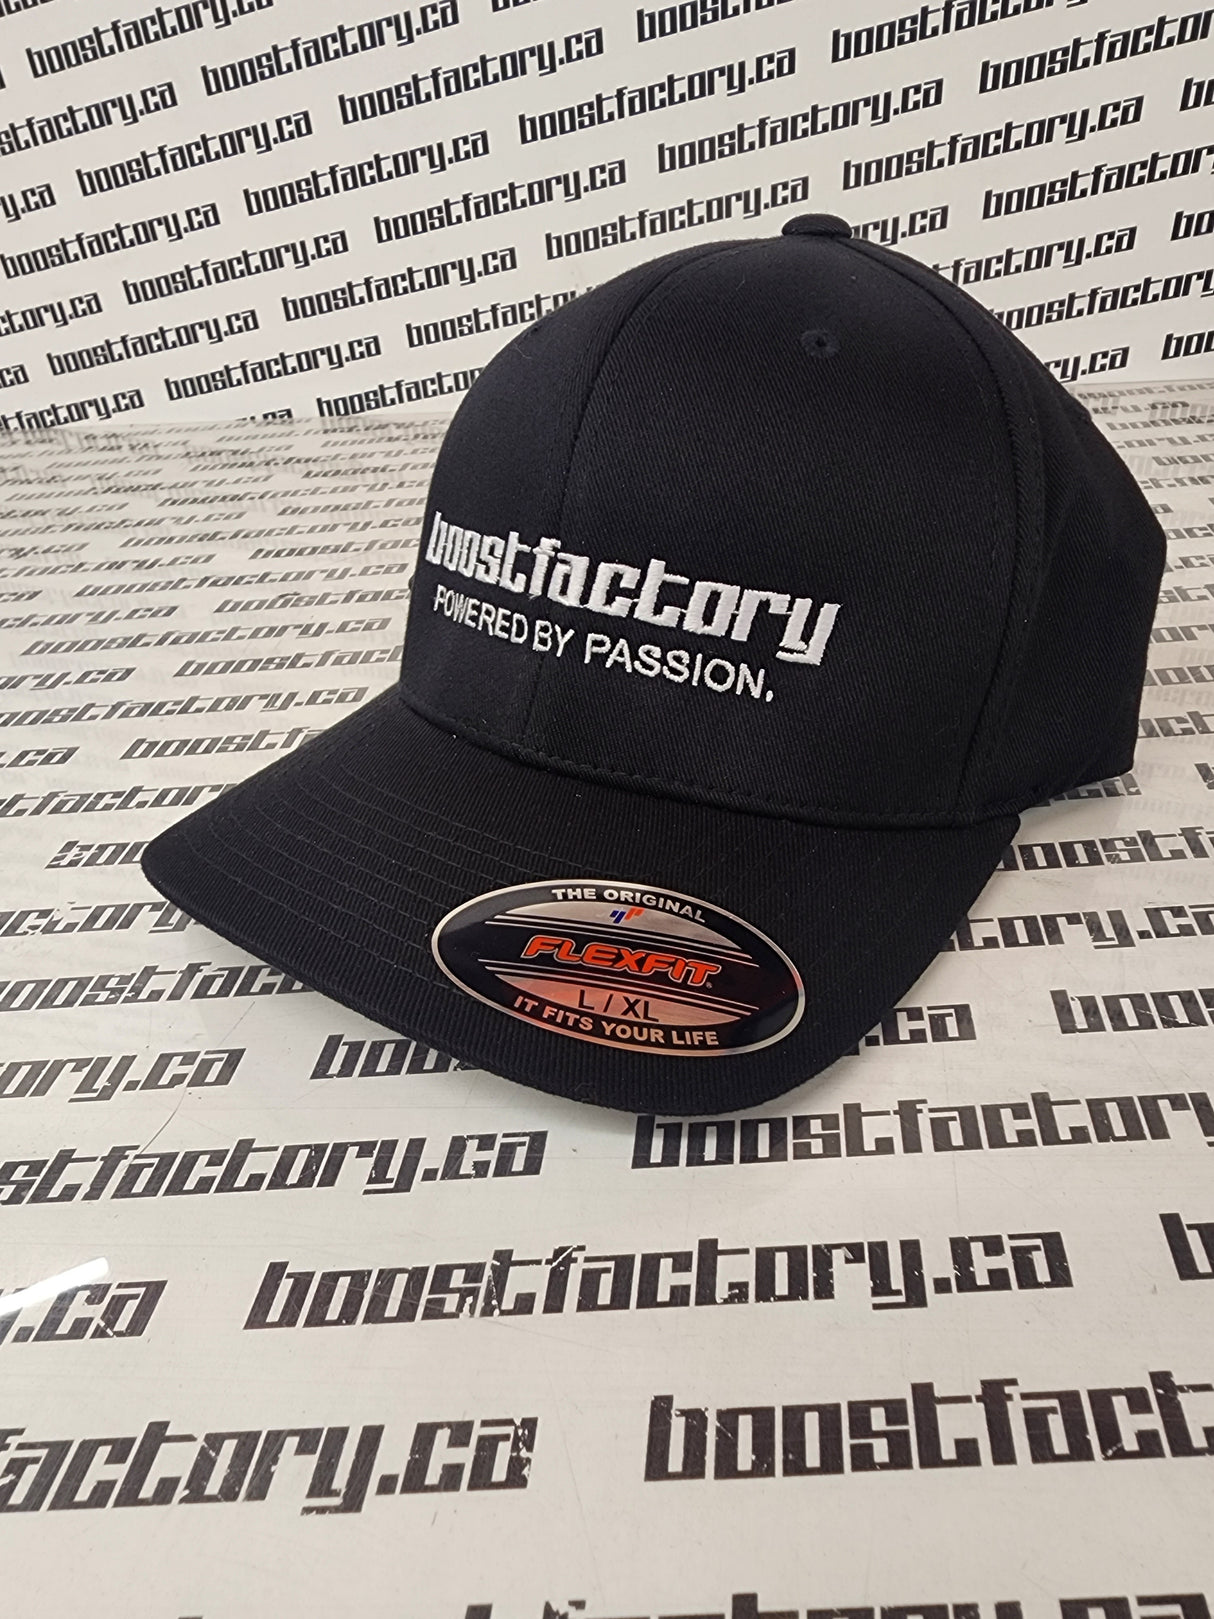 Boost Factory Hats! ''Powered By Passion''